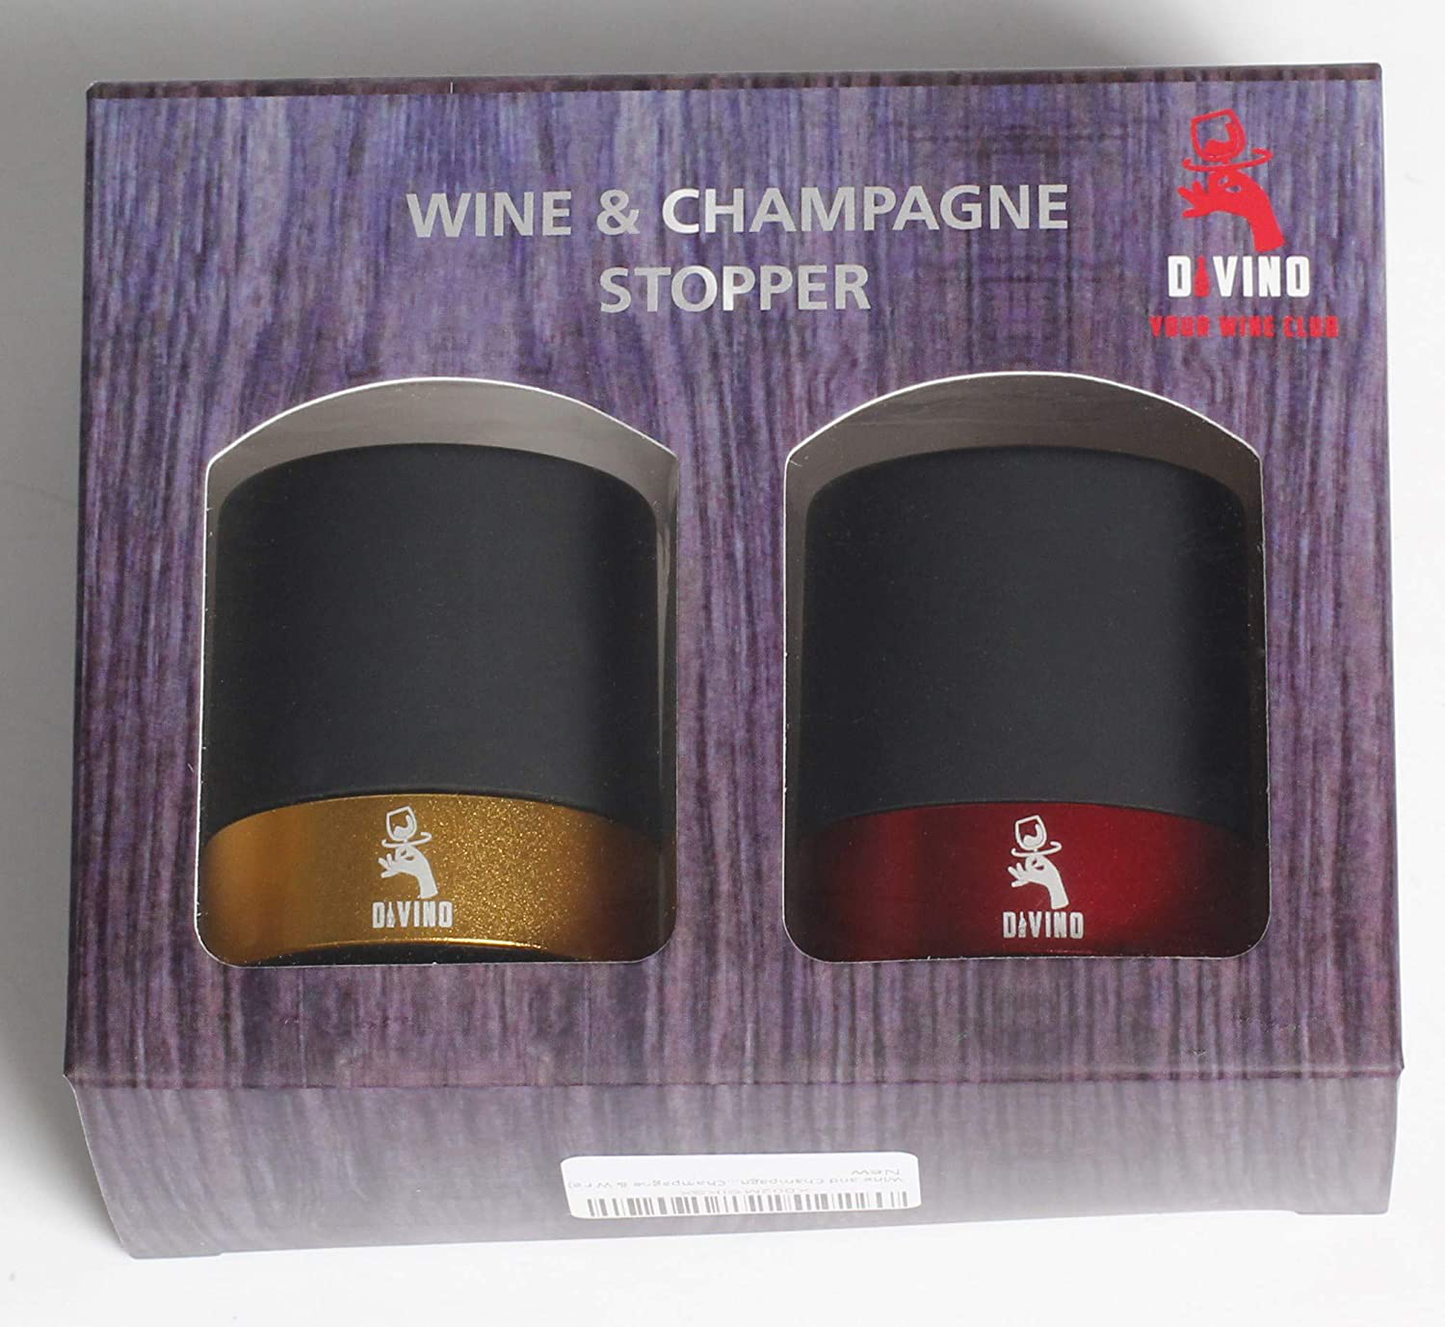 Wine and Champagne Stopper with Aluminium Ring, Professional Bottle Sealer for Wine, Champagne, Cava, Prosecco & Sparkling Wine, Saver Plug, Compact Bottle Plug Set of 2 (GOLD & RED, Champagne & Wine)